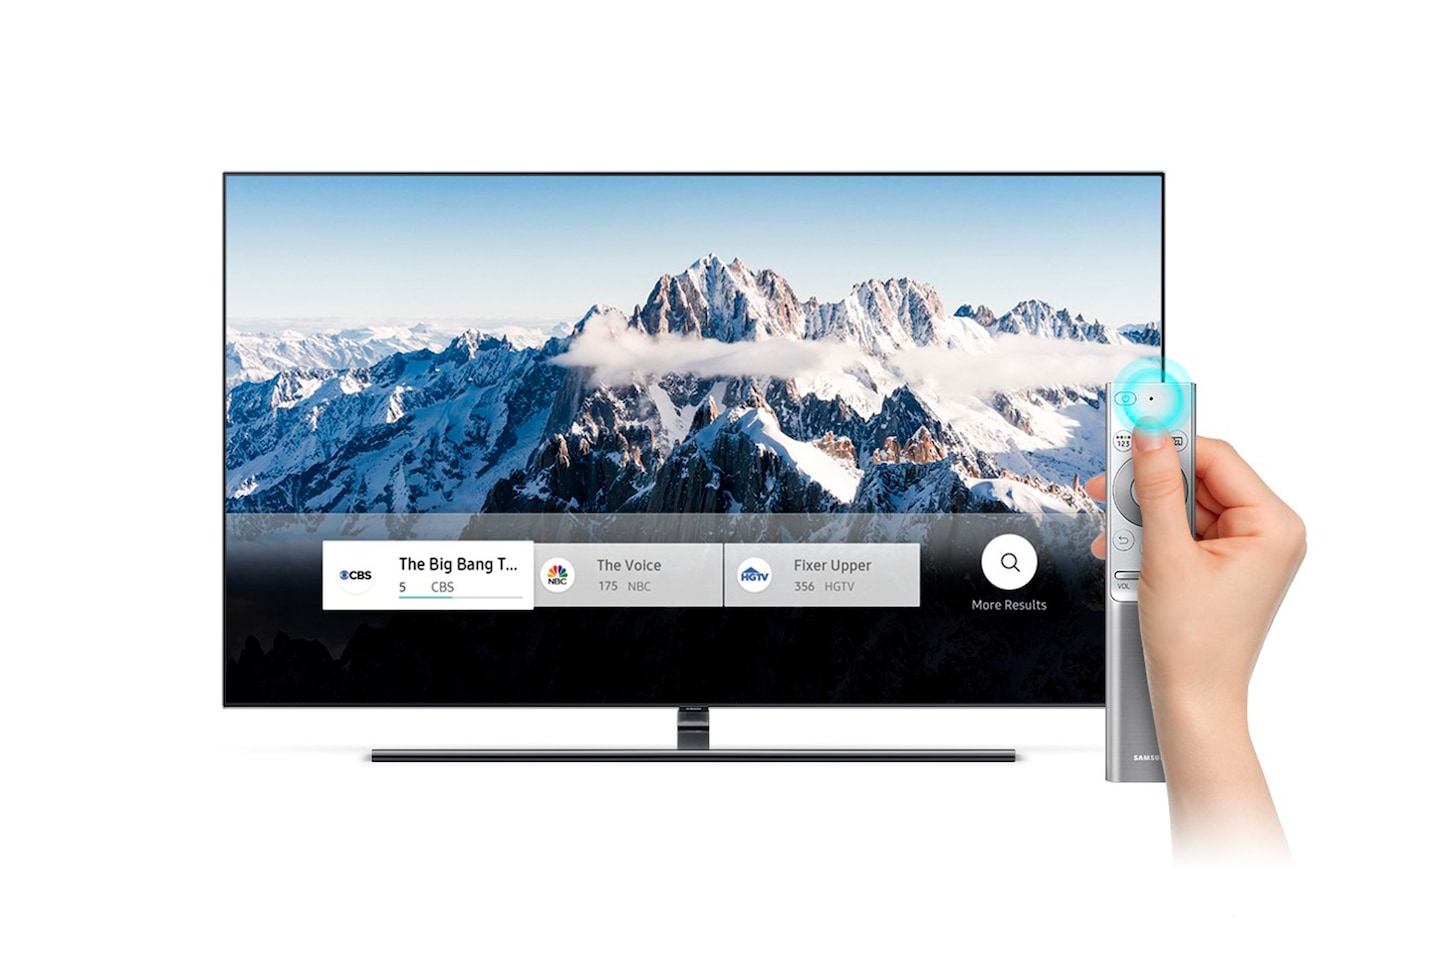 Voice Assistant on TV